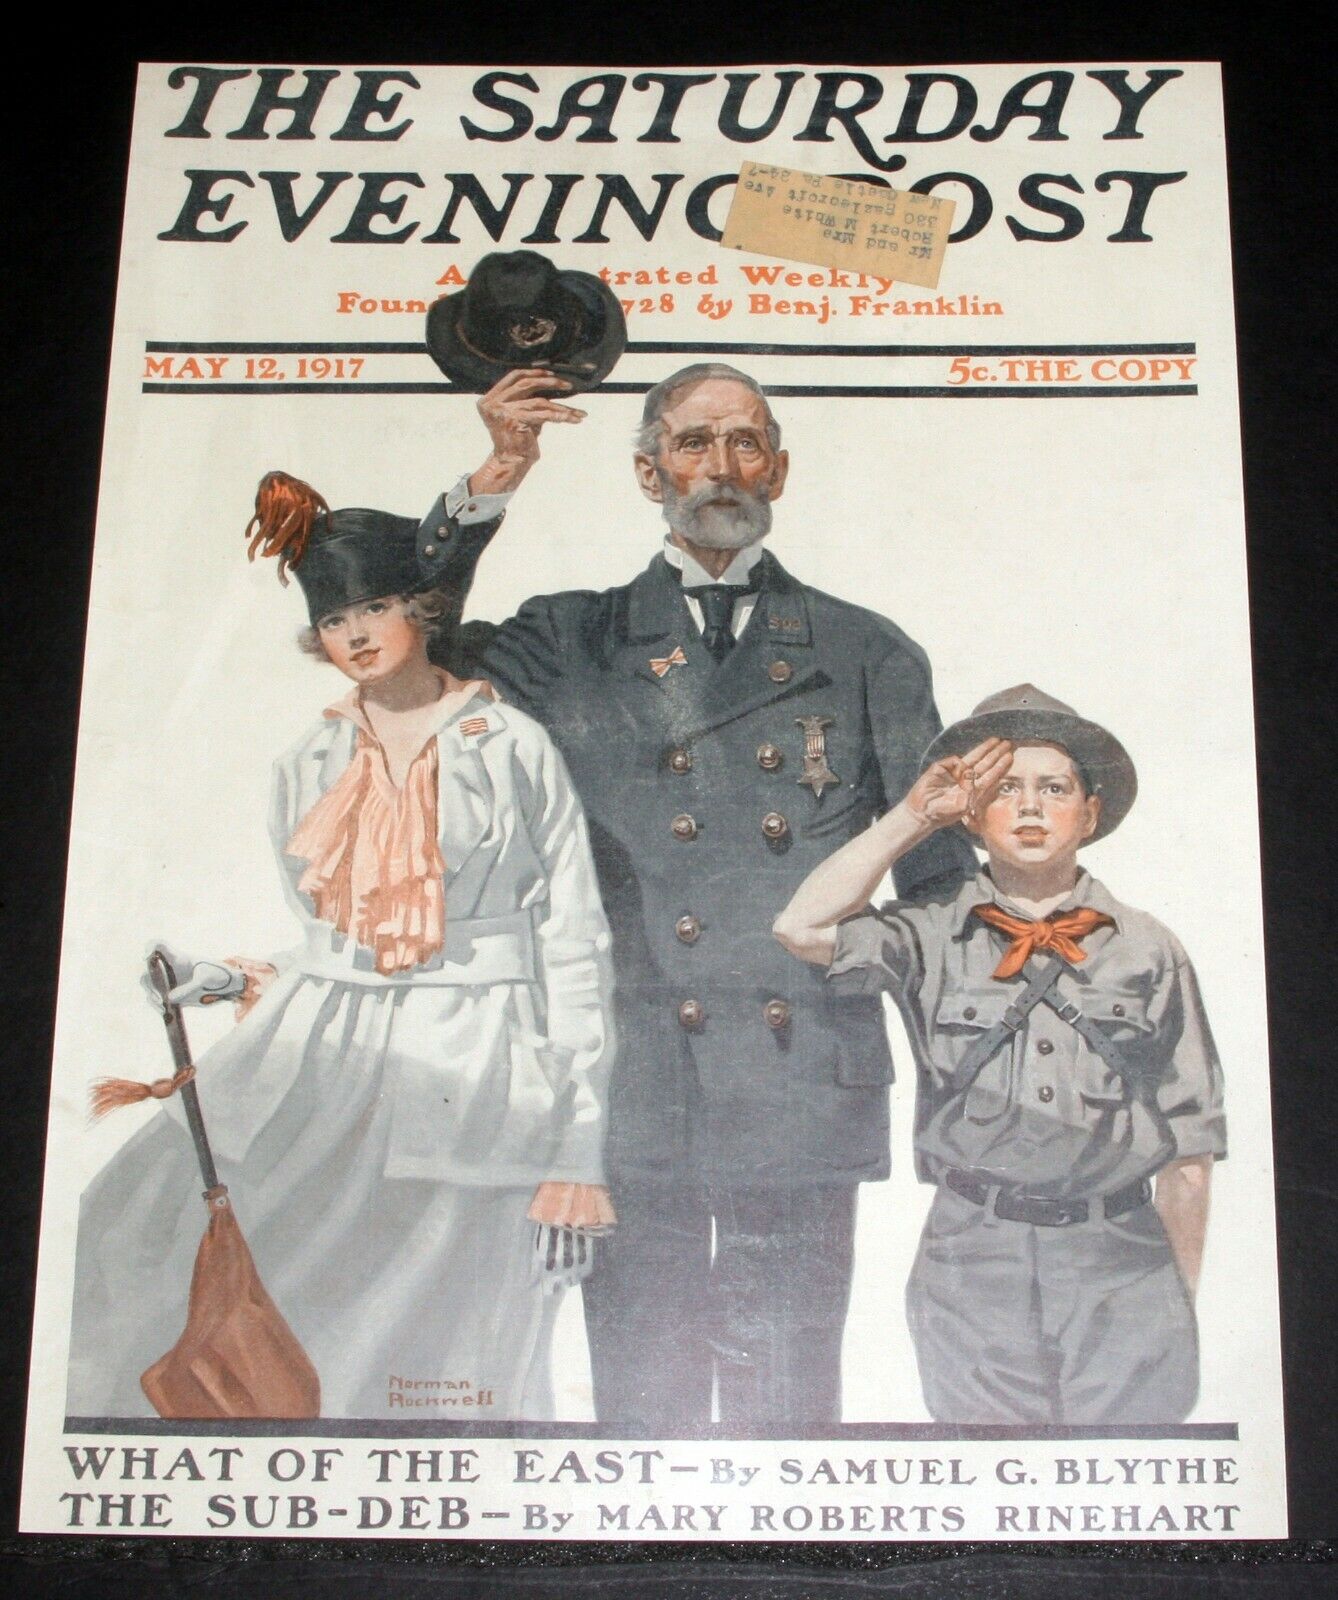 1917 MAY 12 OLD SATURDAY EVENING POST MAGAZINE COVER (ONLY) NORMAN ROCKWELL ART